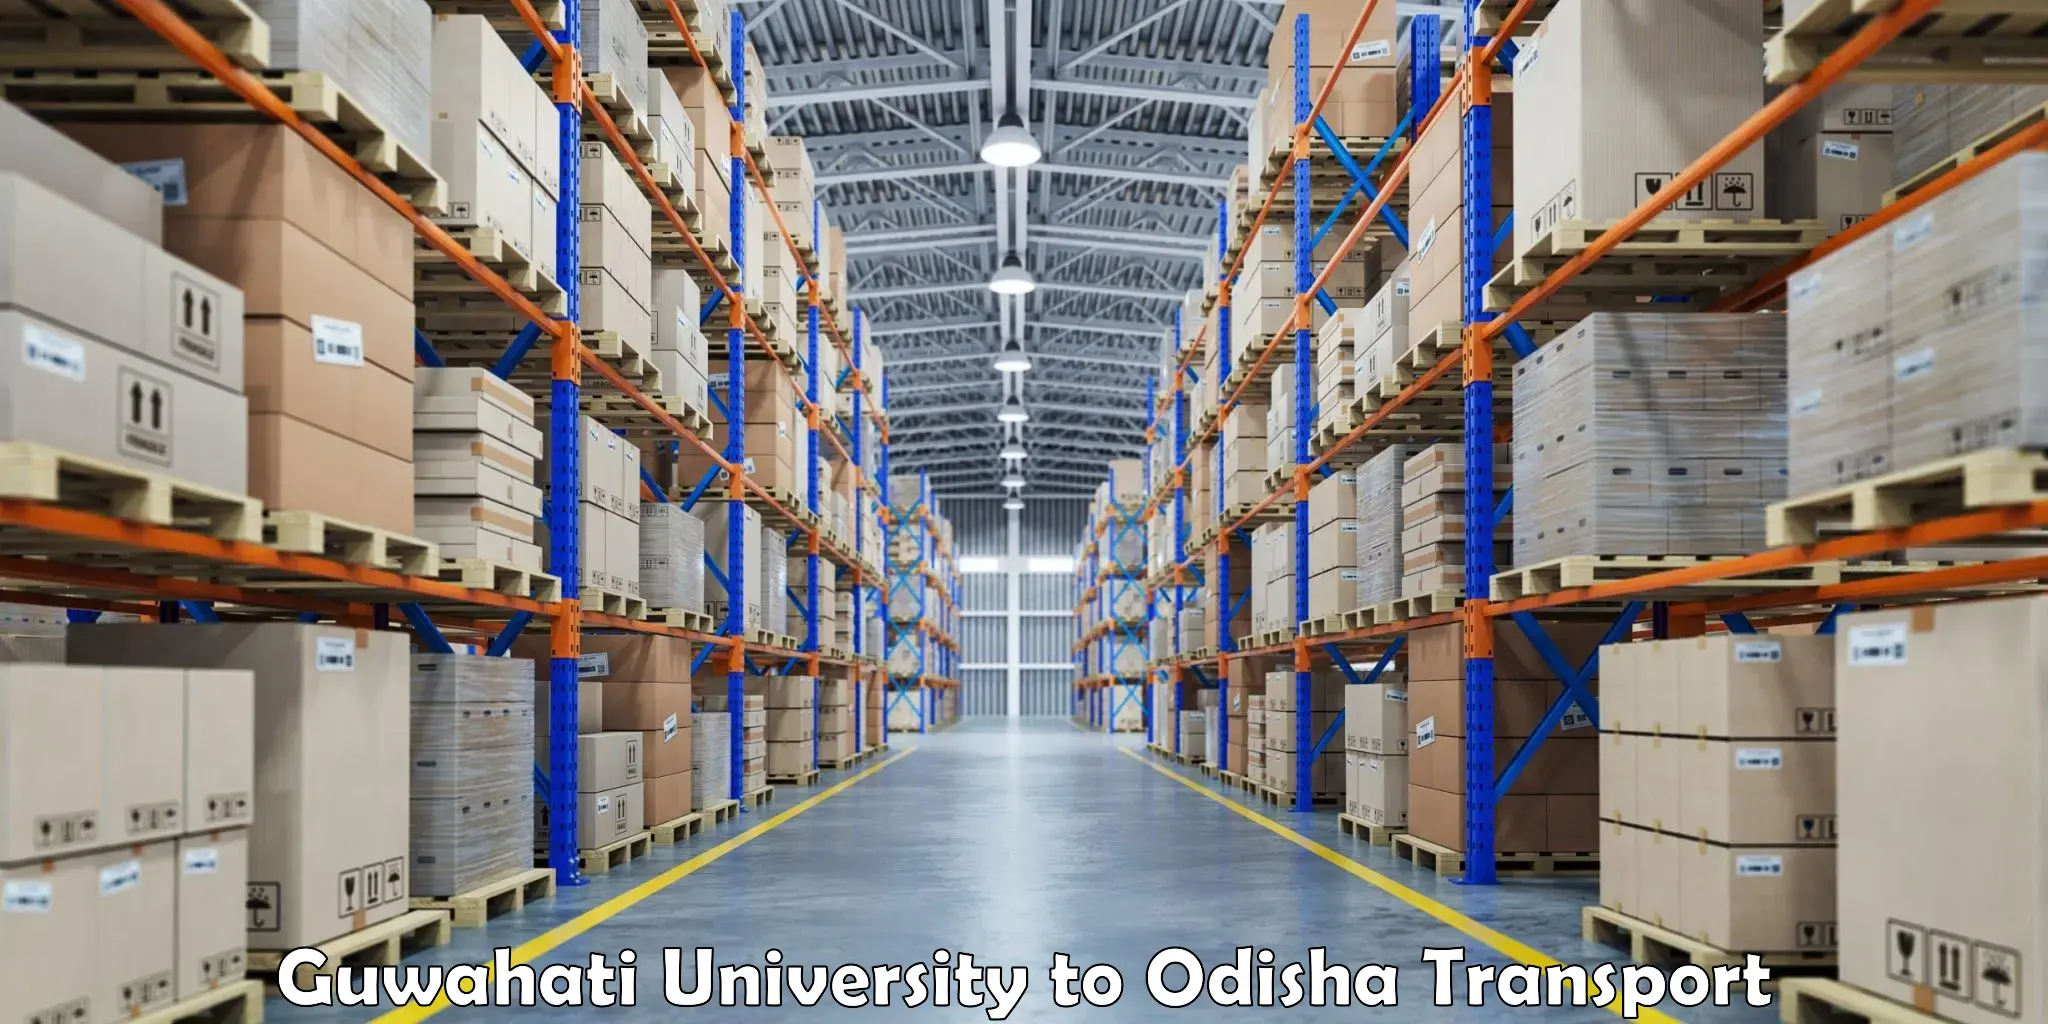 Part load transport service in India in Guwahati University to Keonjhar